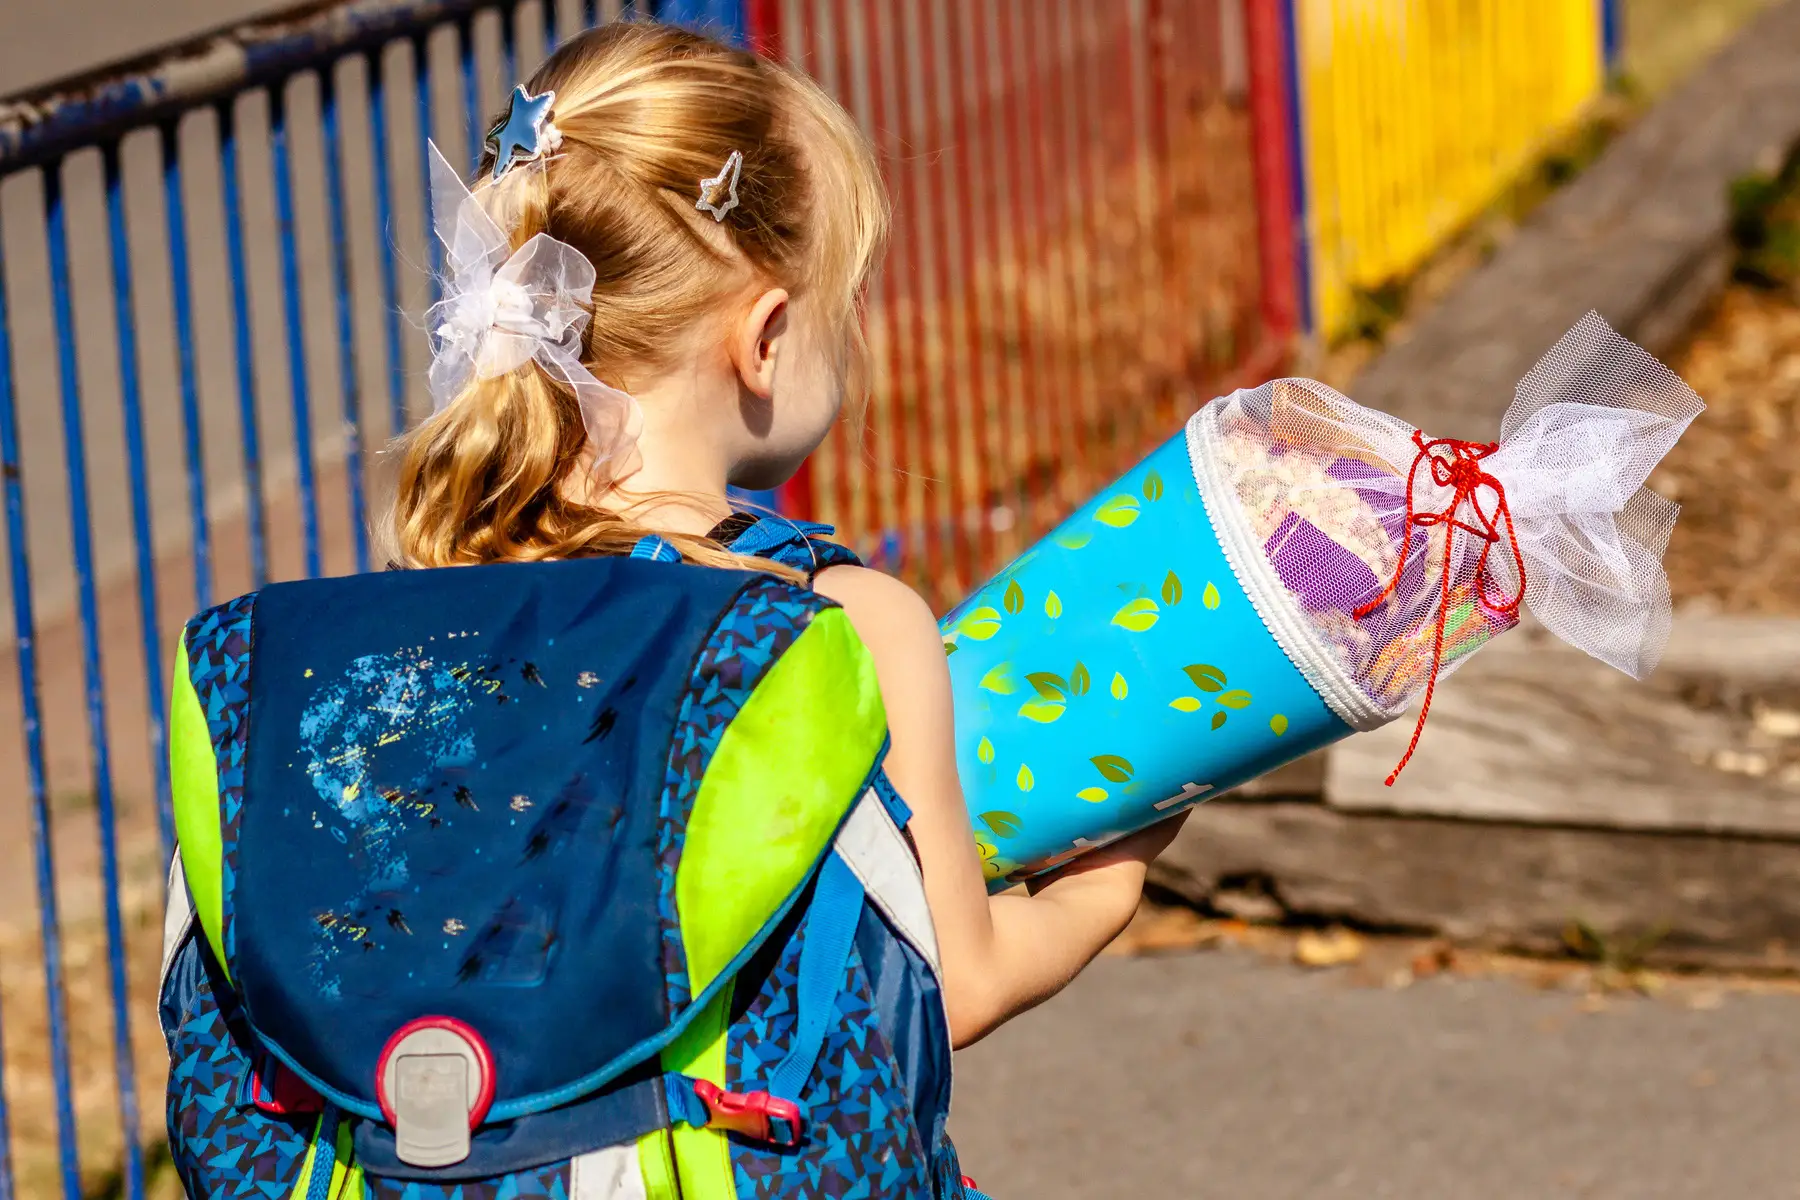 A girl carrying a Schultüte to her primary school in Germany